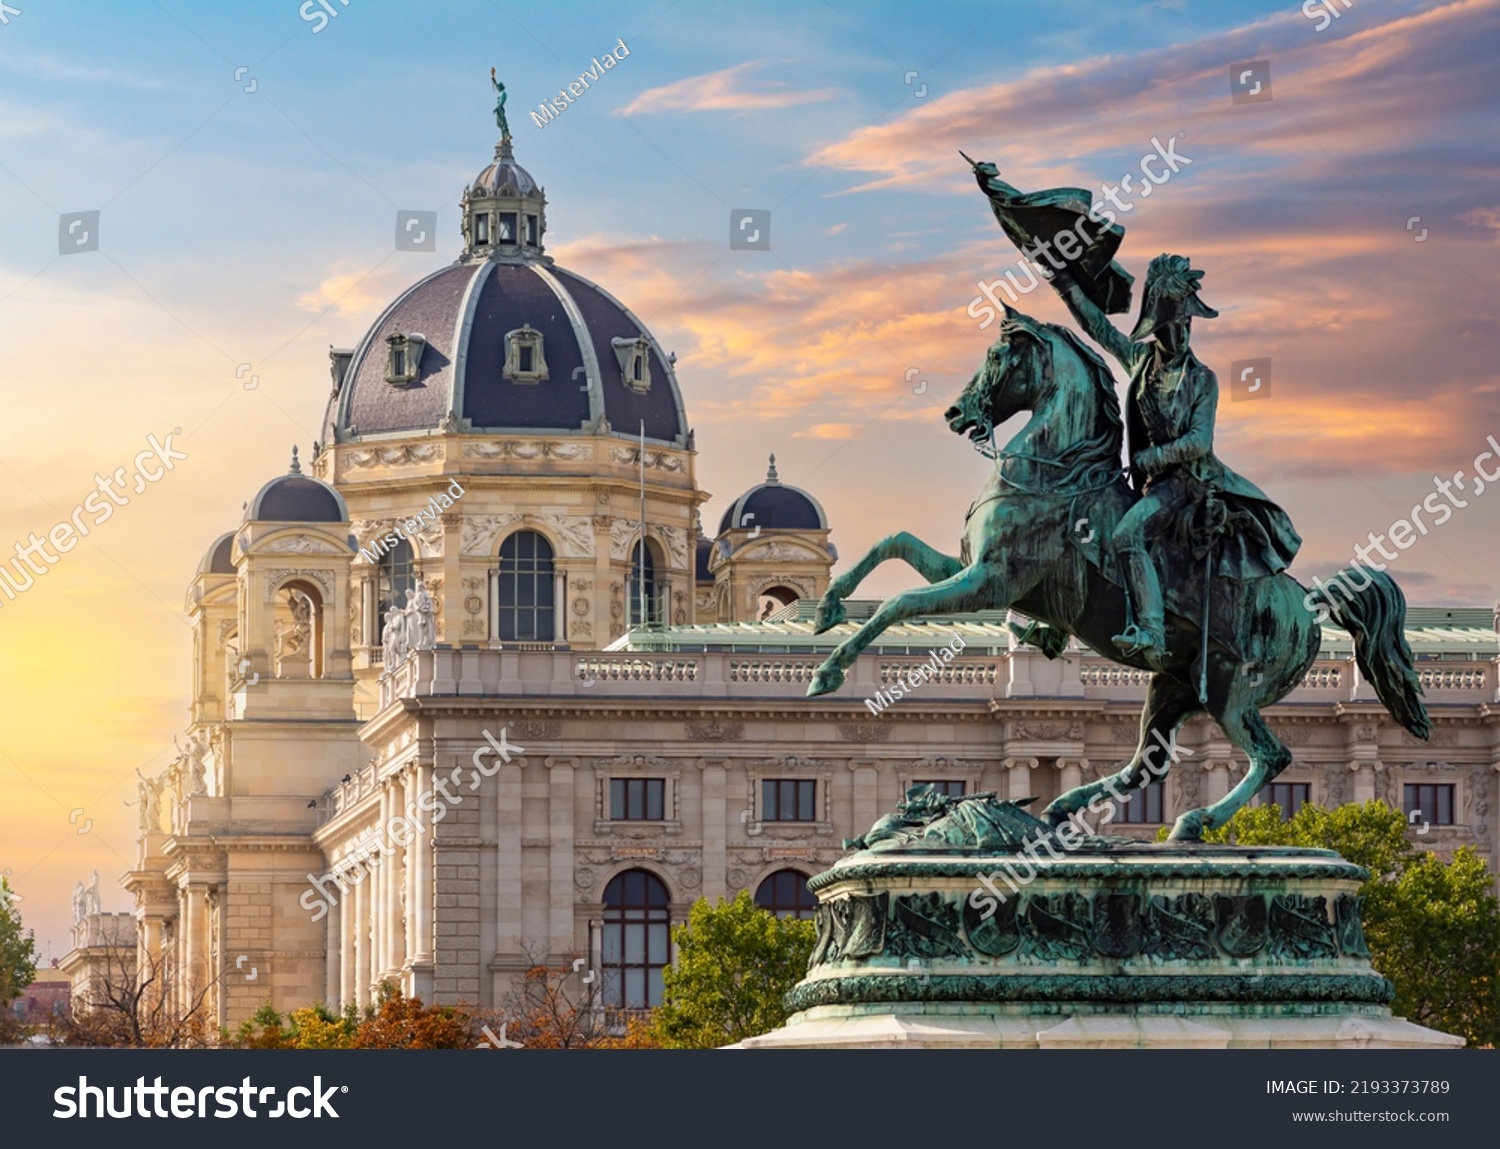 Statue of Archduke Charles on Heldenplatz square and Museum of Natural History dome at sunset, Vienna, Austria #2193373789